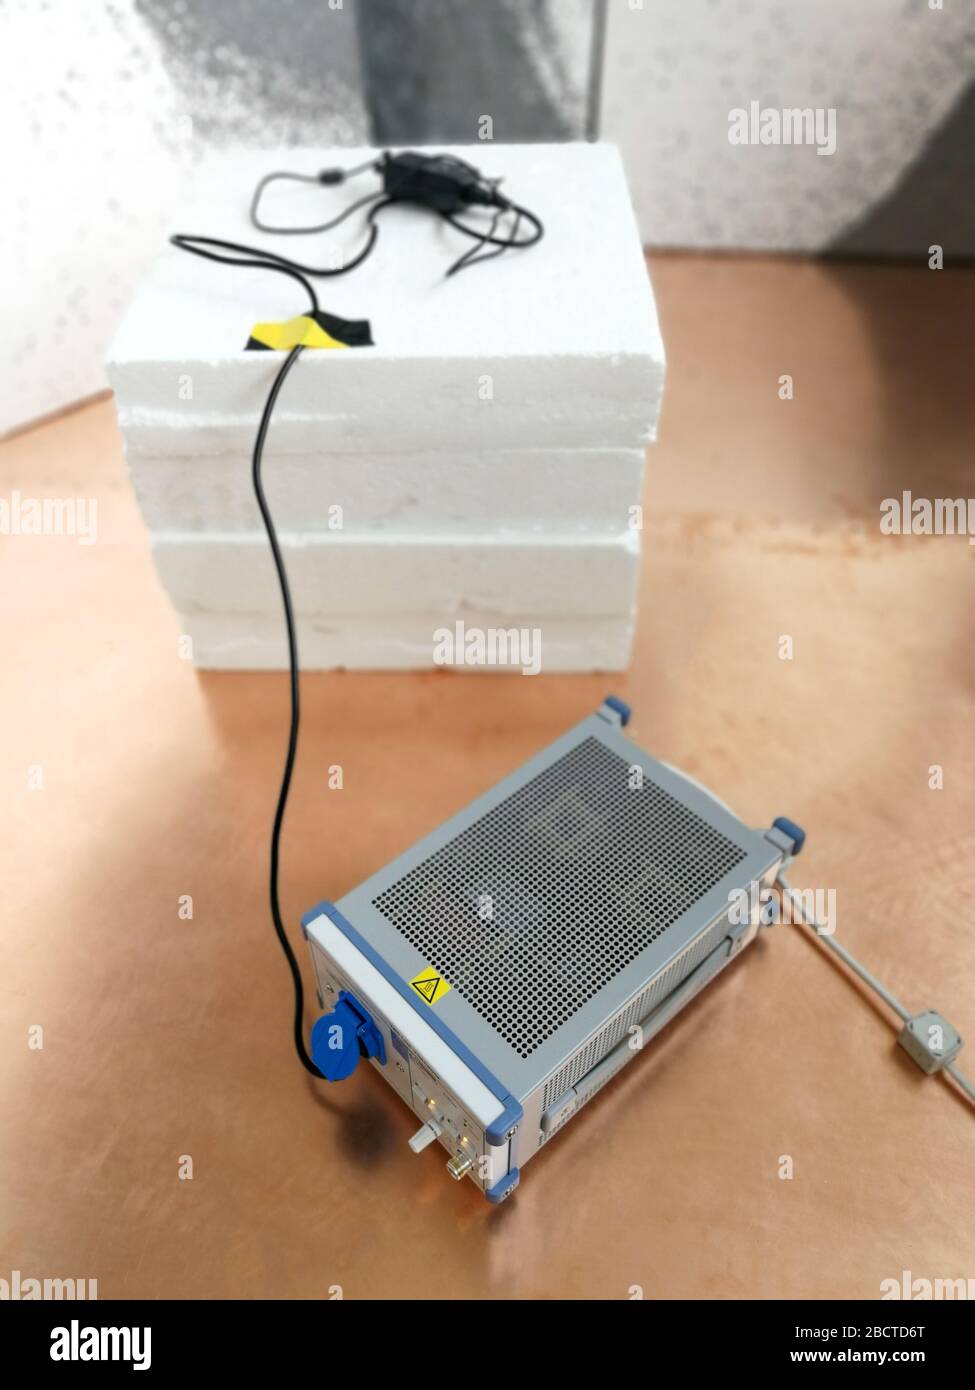 Line impedance stabilization network for electromagnetic compatibility tests Stock Photo